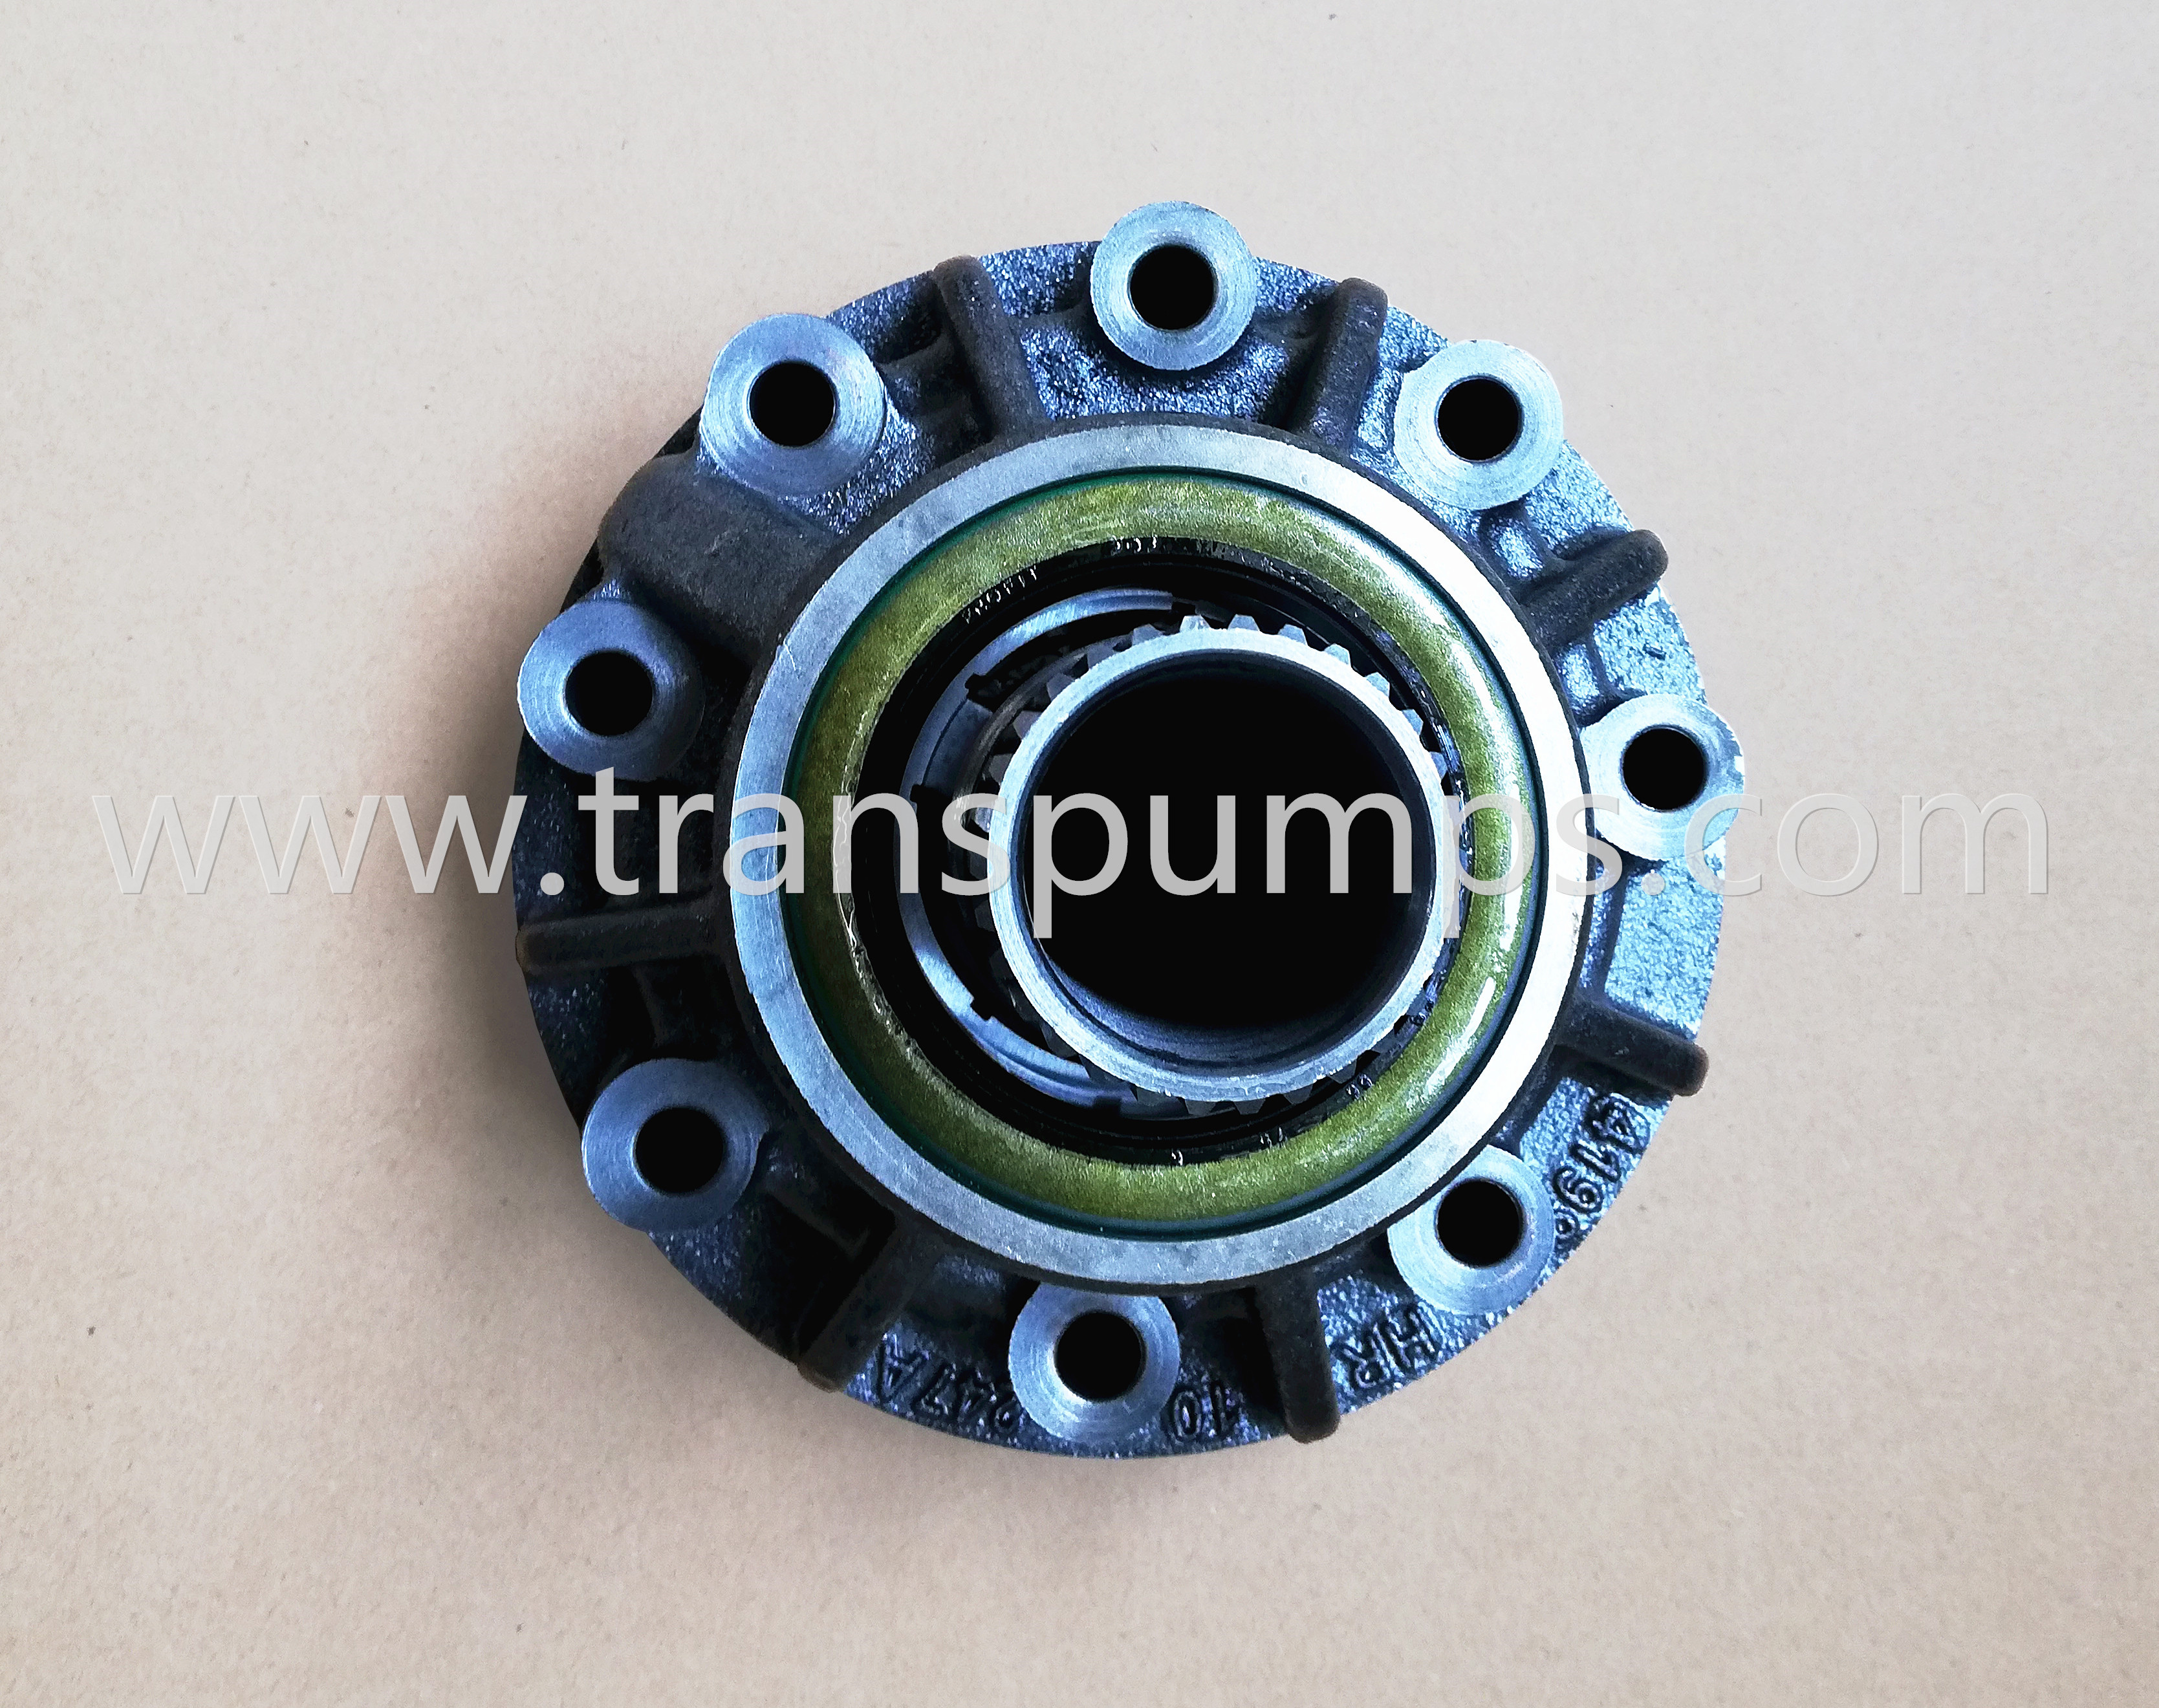 ZF pump manufacturer, ZF pump 050122220664, transmission oil pump assy, transmission pump replacement price, John deere backhoe charge pump, ZF Pump Assembly Transmission, ZF transmission pump assembly 0501220664, Насос, 0501.220.664 OR 0501220664 OR 0501-220-664 OR 0501 220 664 ZF, ZF 0501220664 pumpe, New original ZF 0501220664 pump, ZF bomba, ZF pompa, ZF hacoc, ZF pumpe, ZF pompe